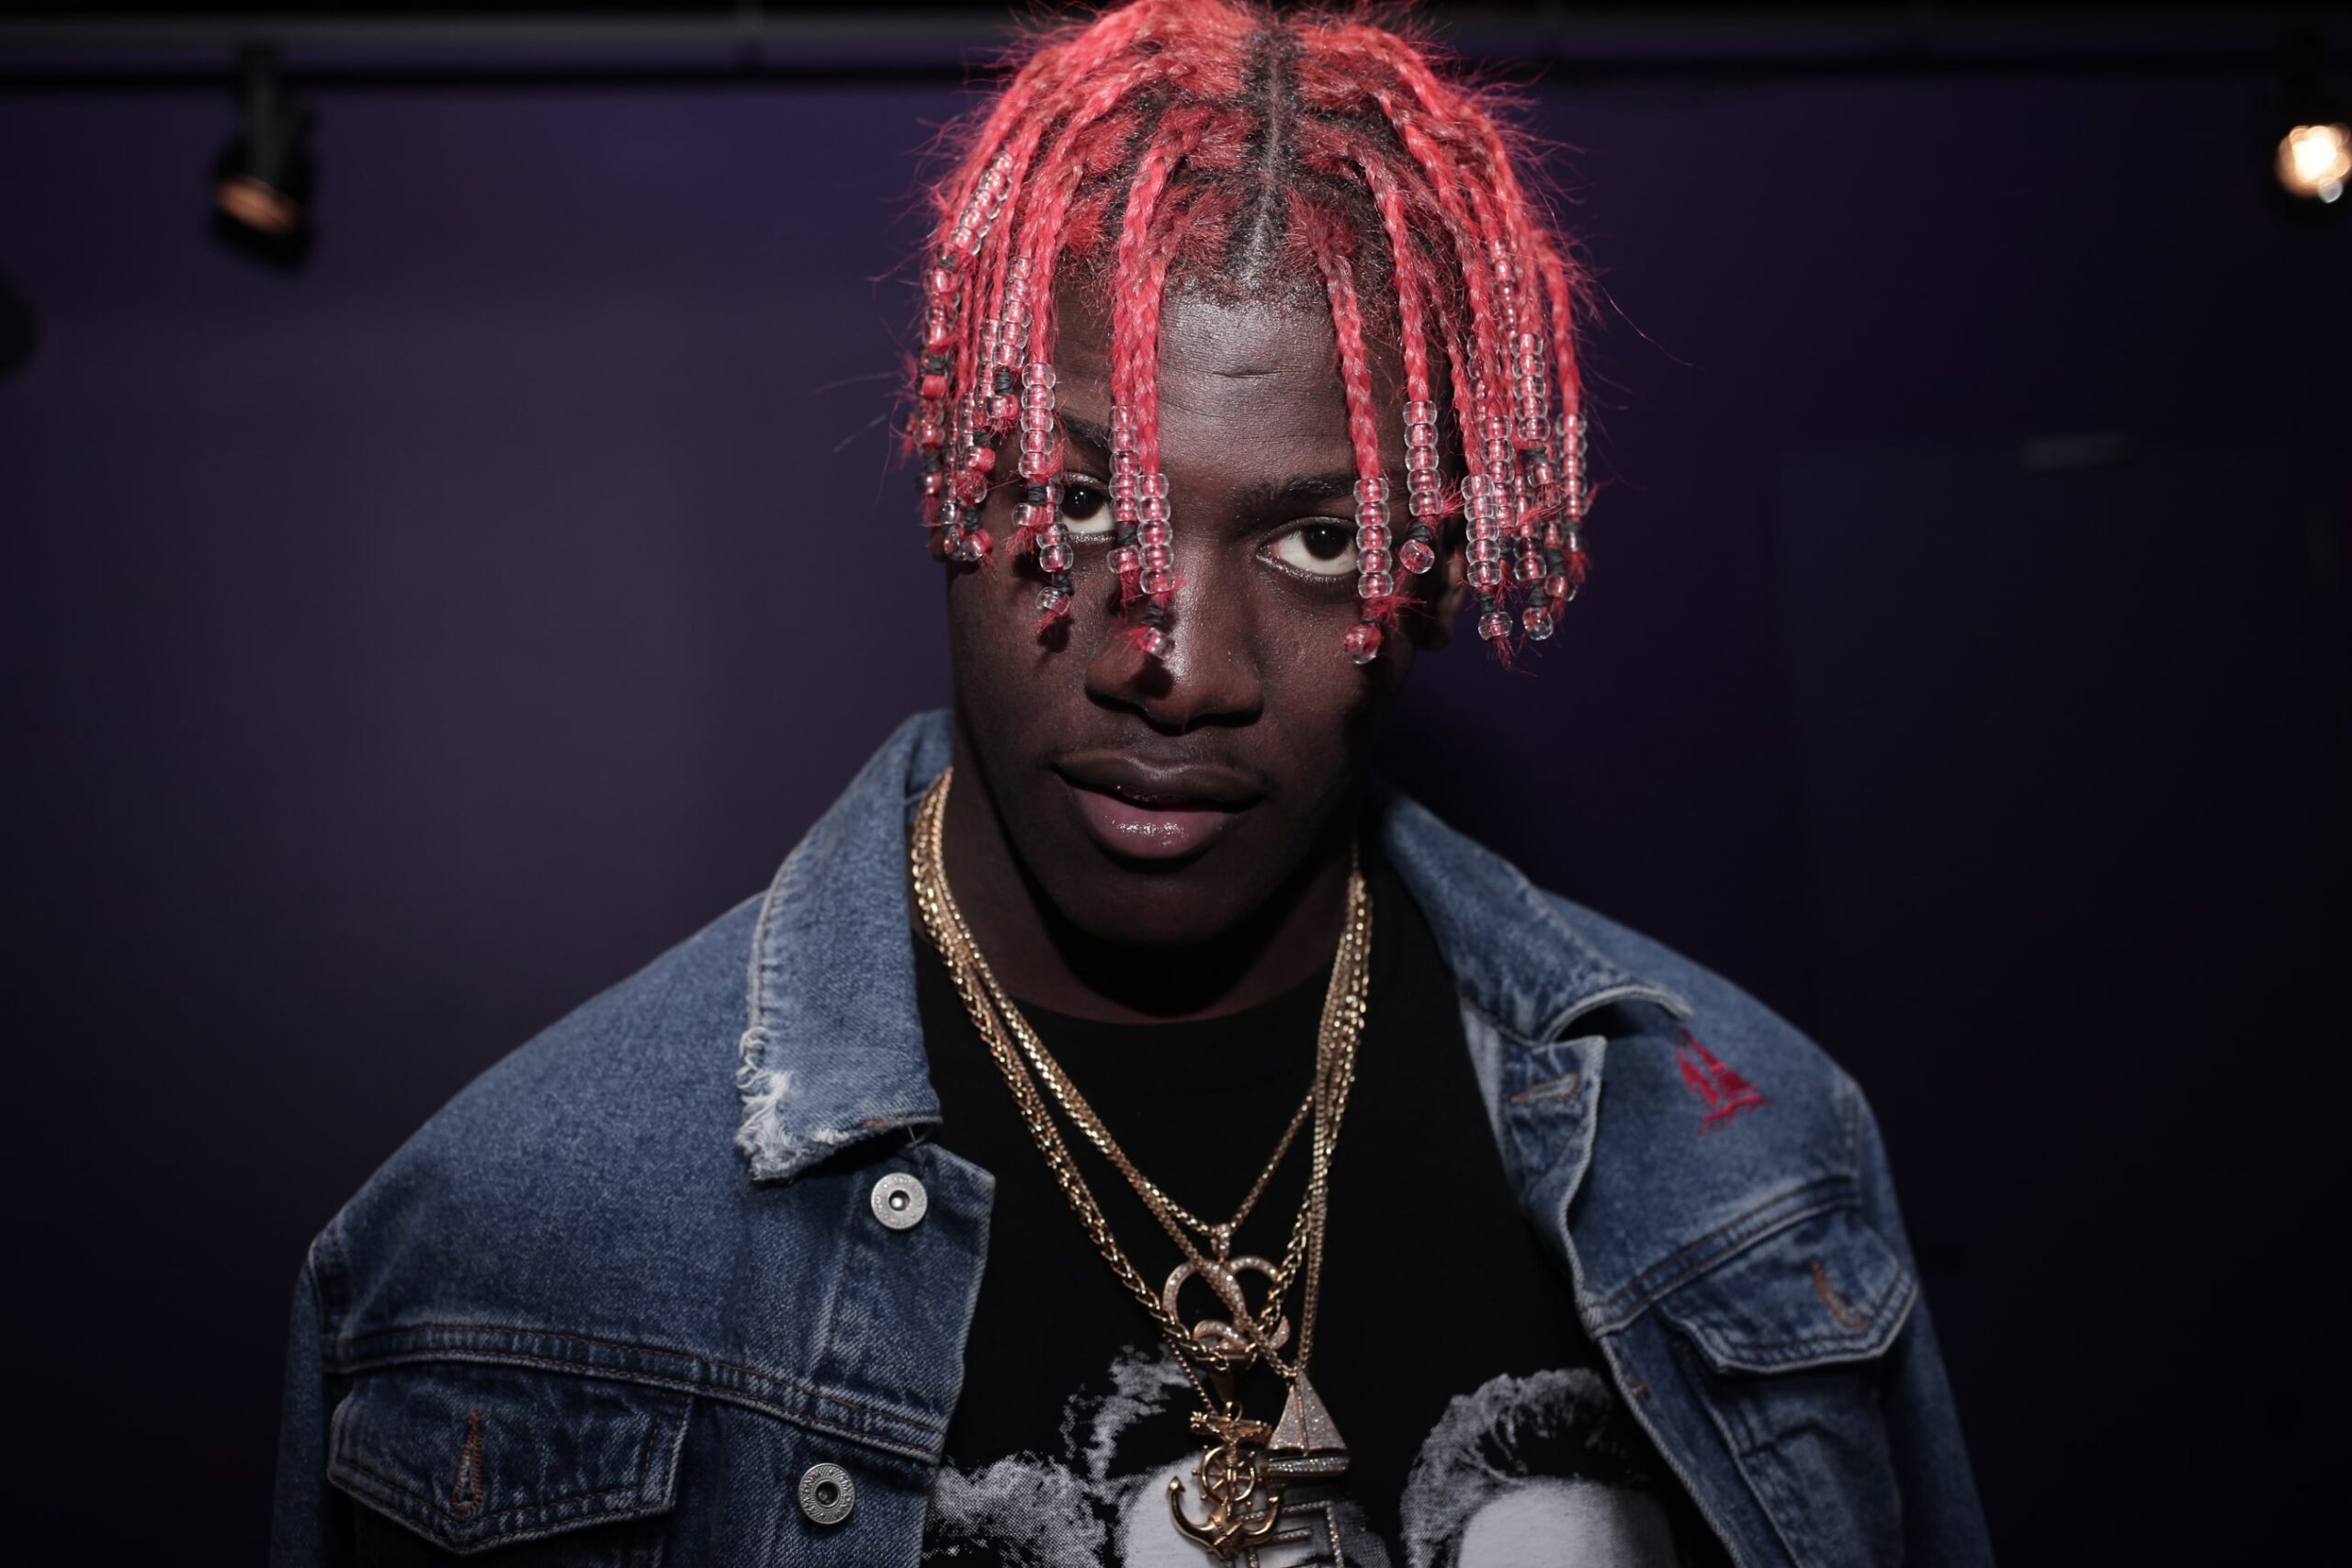 Lil Yachty image